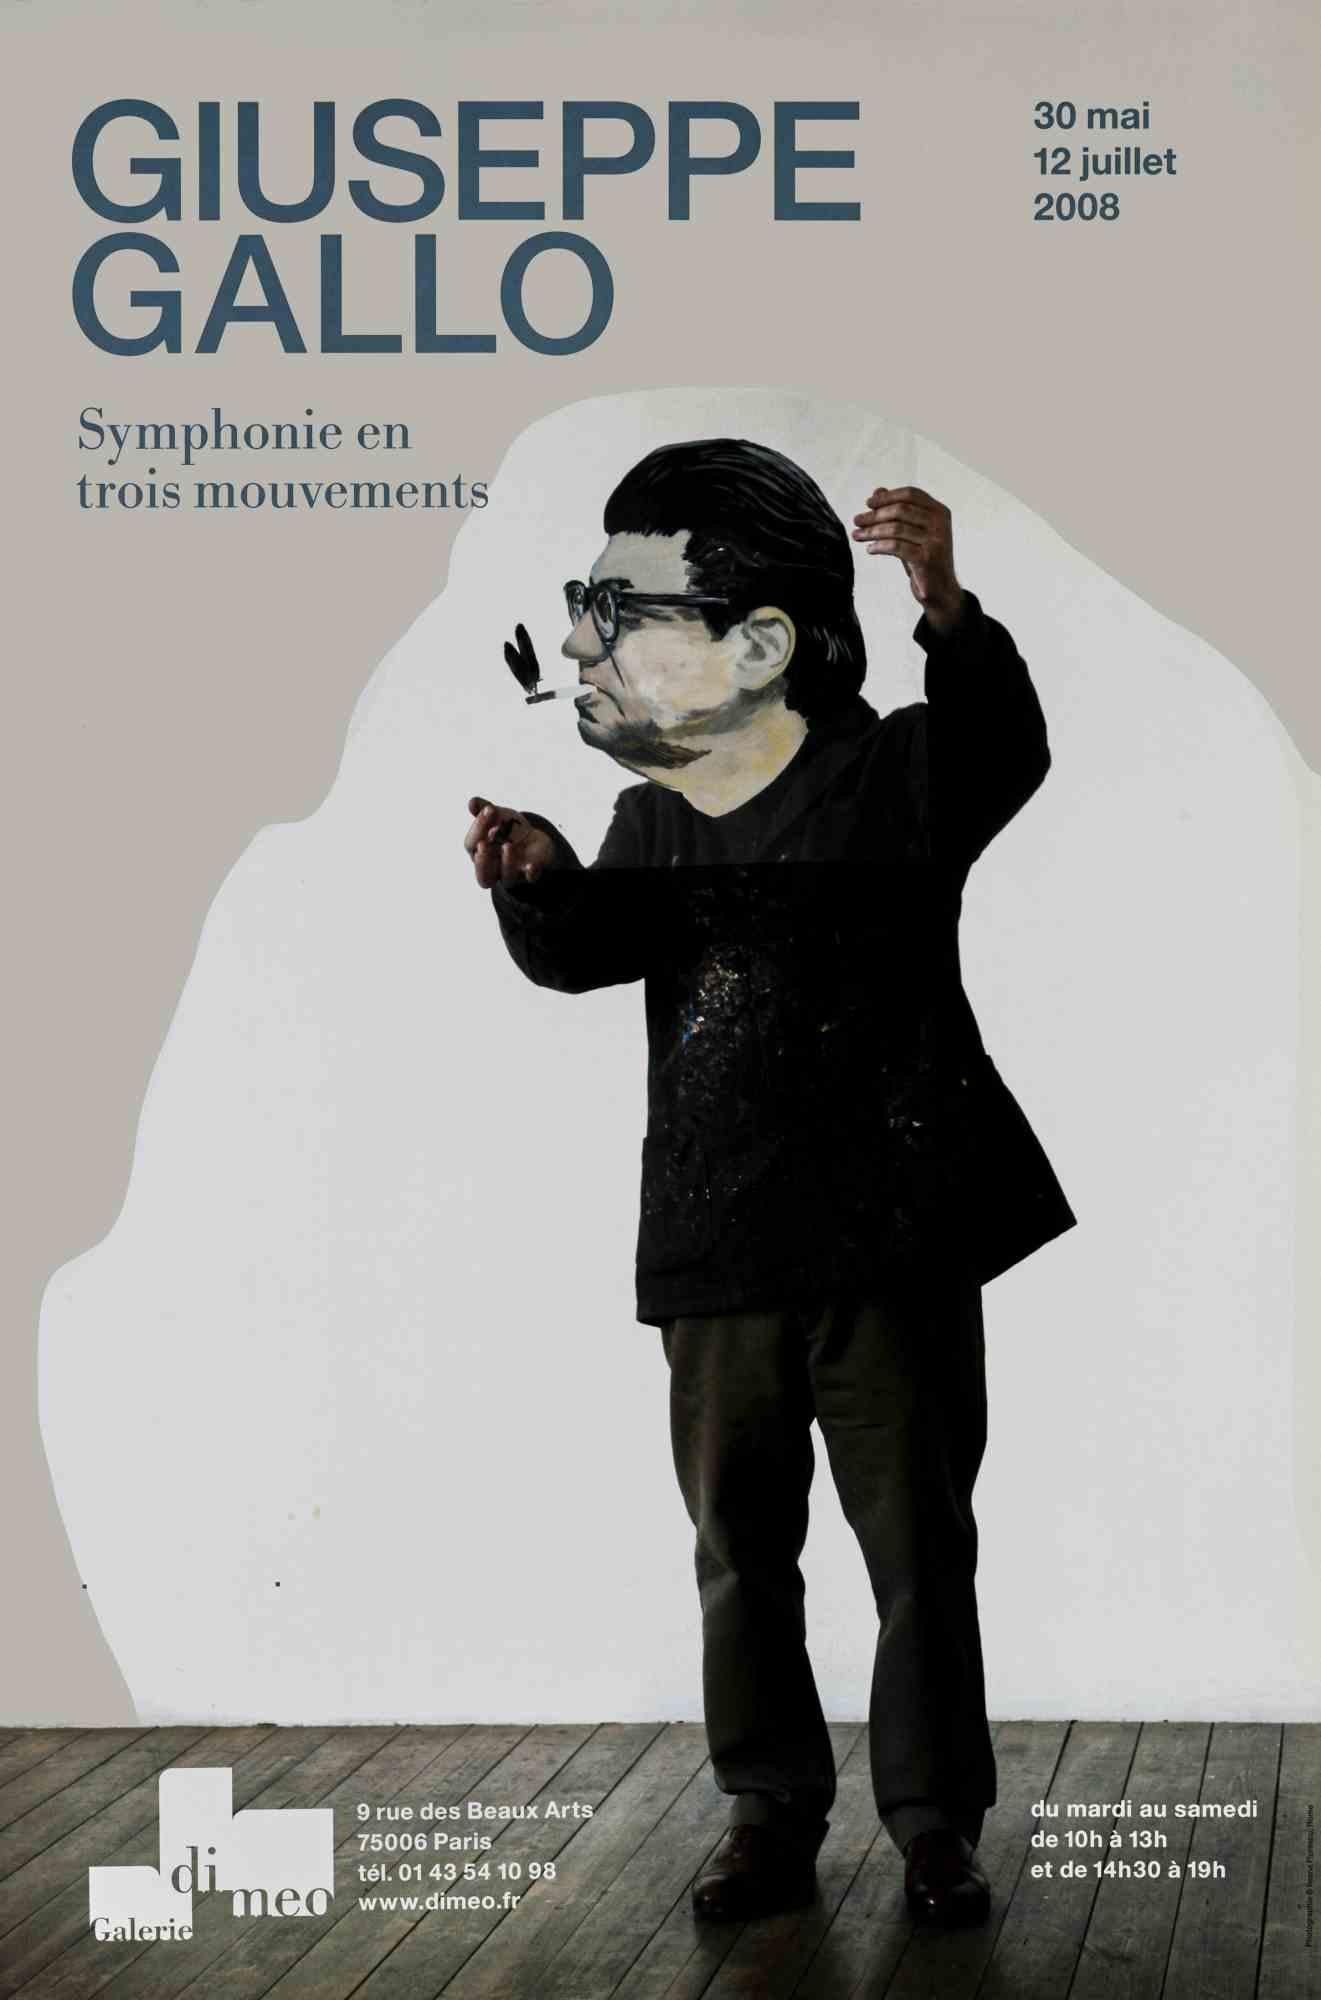 Giuseppe Gallo. Symphonie en trois mouvements is a vintage offset poster realized in 2008 .

This artwork was realized in occasion of the exhibition by Giuseppe Gallo at the Galerie Di Meo in Paris from 30th May to 12th July of 2008.

Good